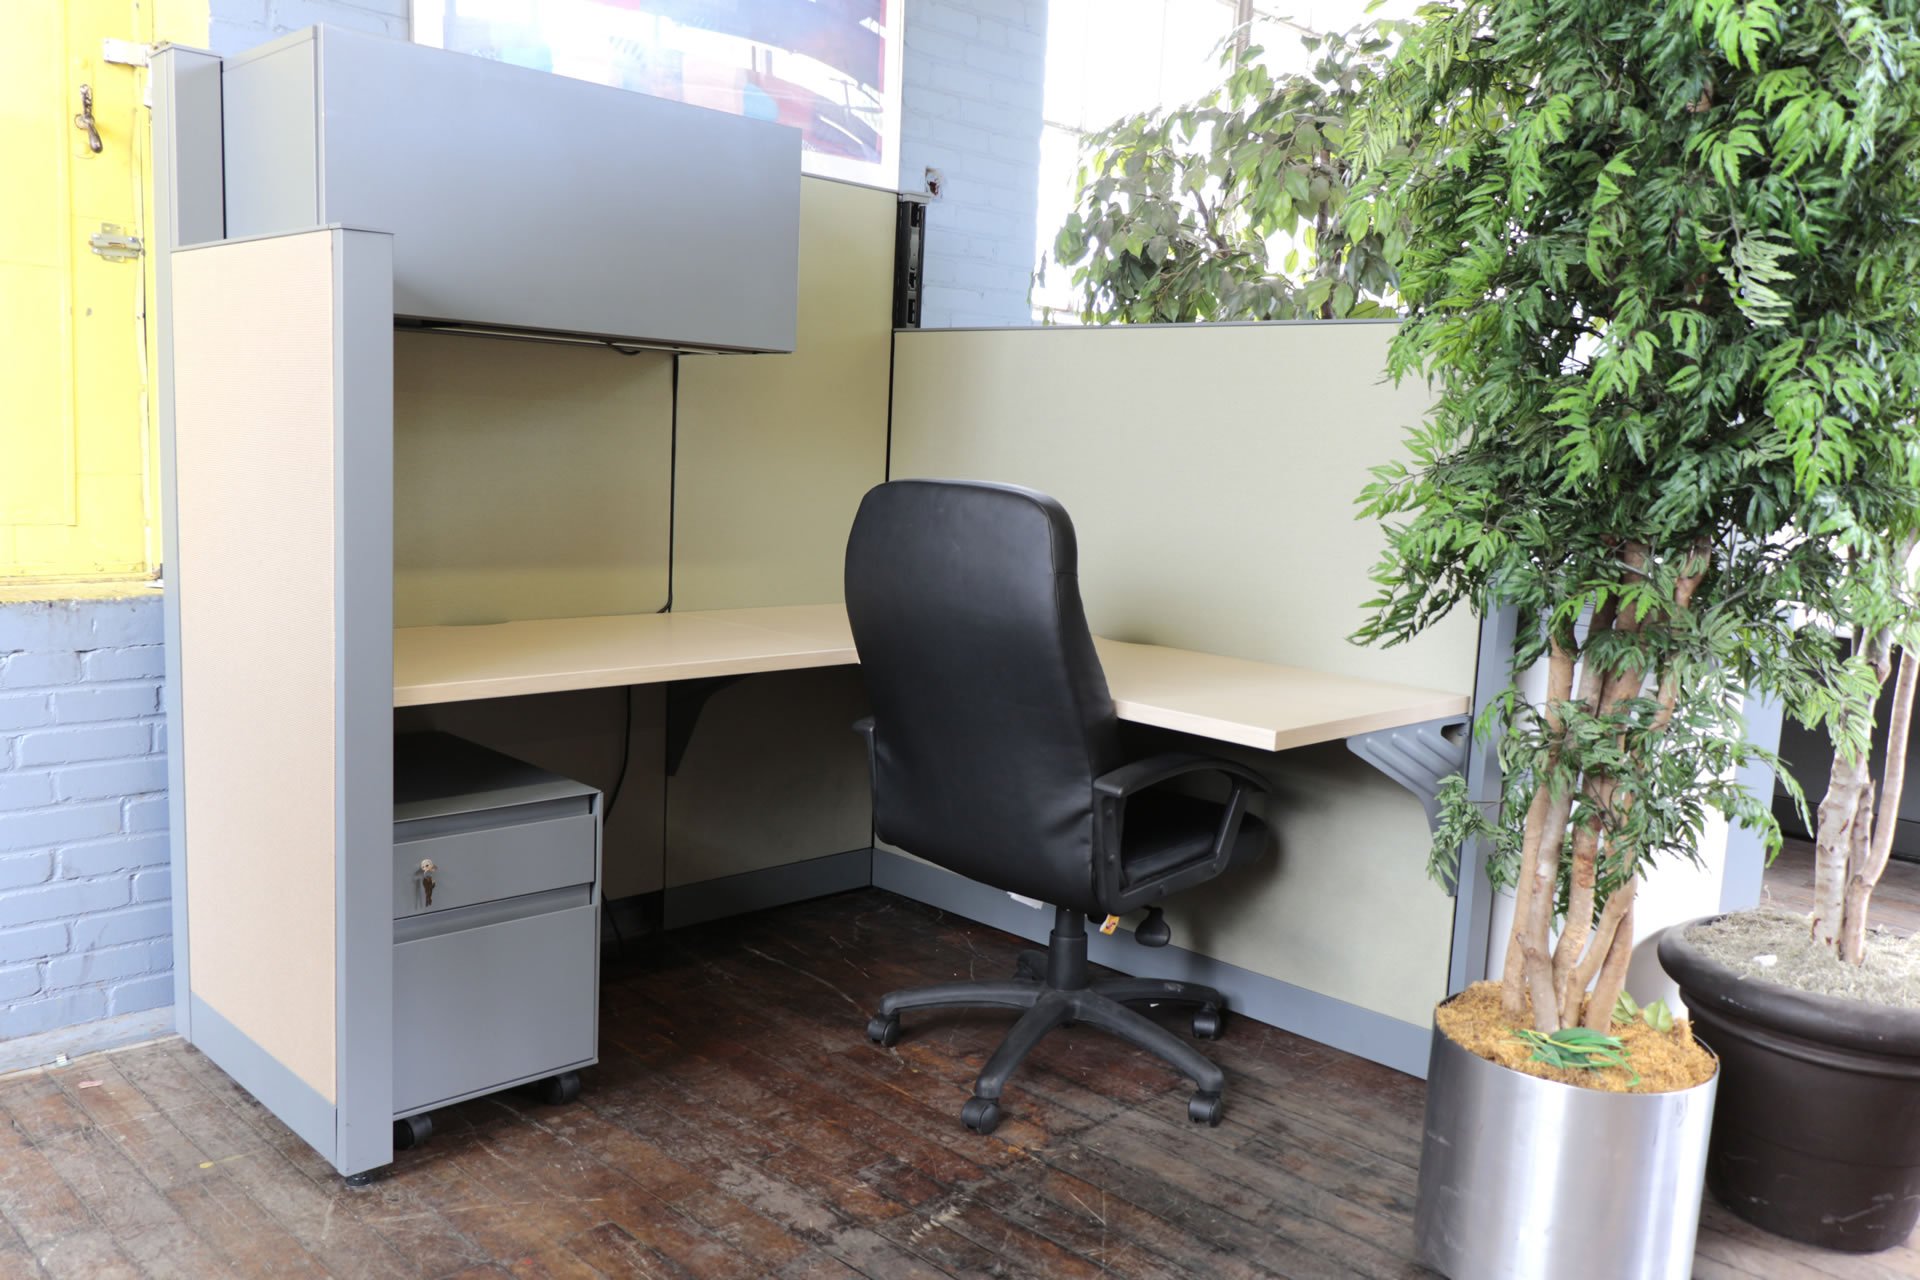 Steelcase Answer 5’x5′ Call Center Cubicles